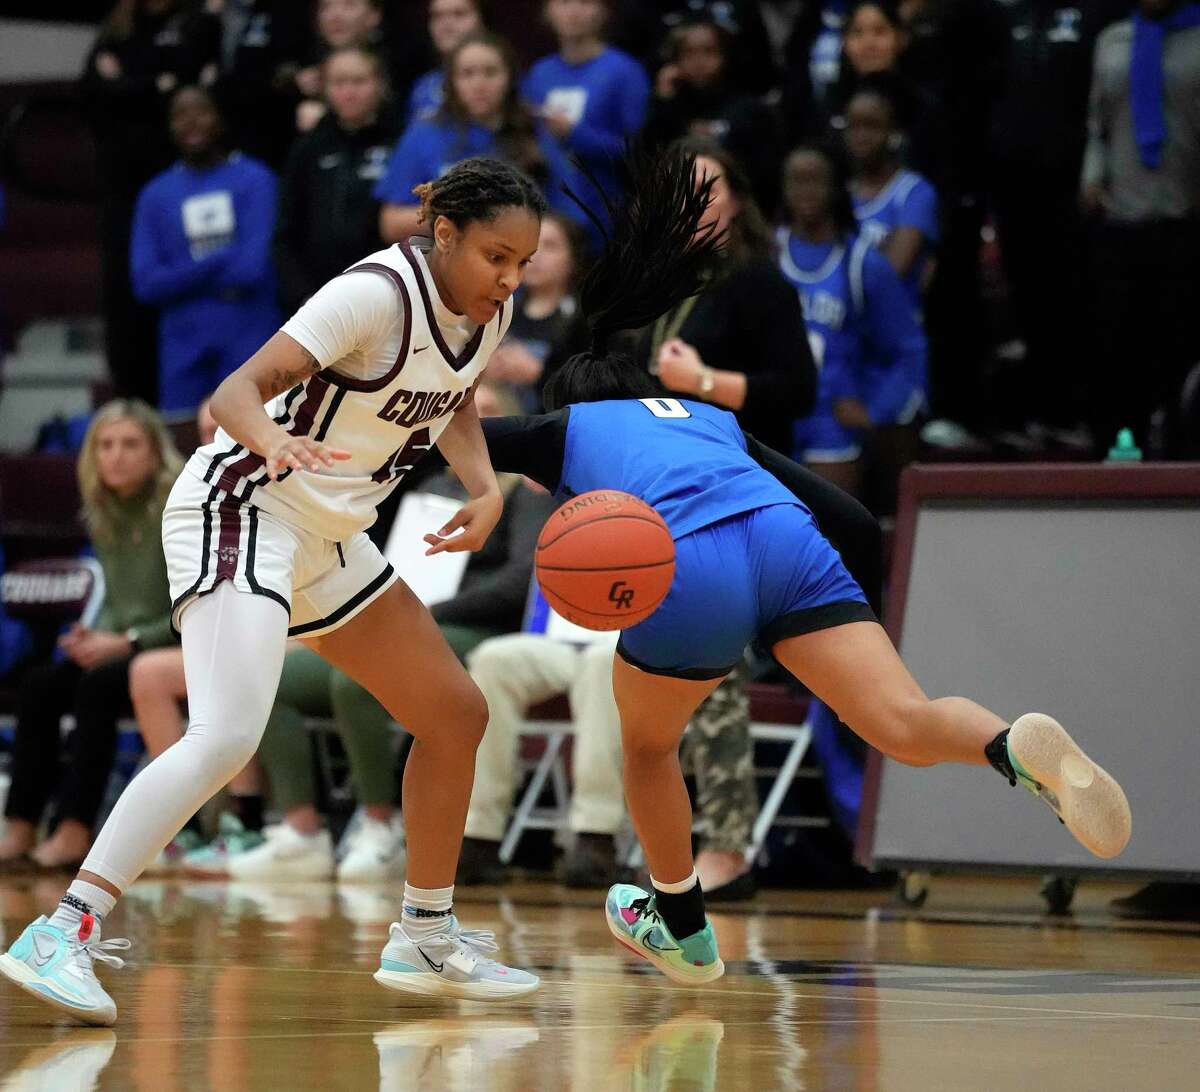 Cinco Ranch's Danielle Williams (15) steals the ball from Katy Taylor's Micah Elegores (0) during the second half of a District 19-6A girls high school basketball game at Cinco Ranch High School on Tuesday, Nov. 22, 2022 in Katy. Cinco Ranch won the game 53-48.